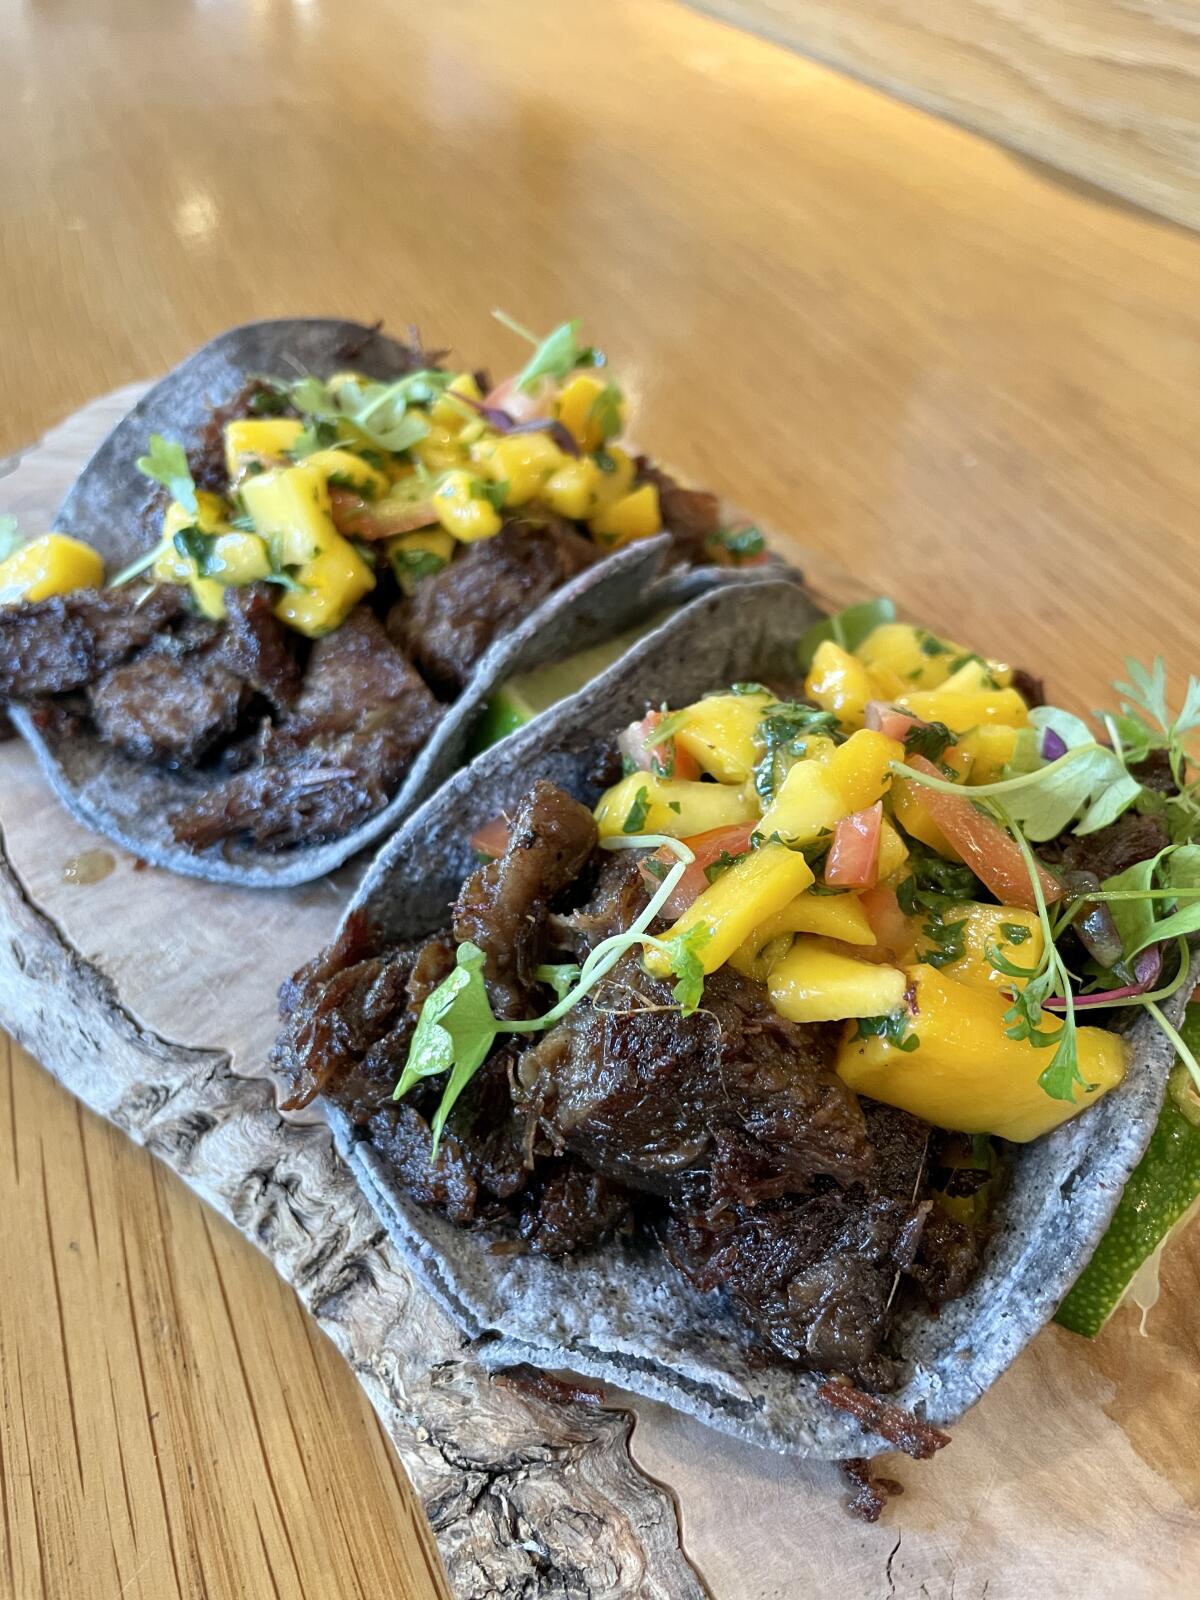 Two beef rendang tacos in blue corn tortillas, topped with mango sambal kicap